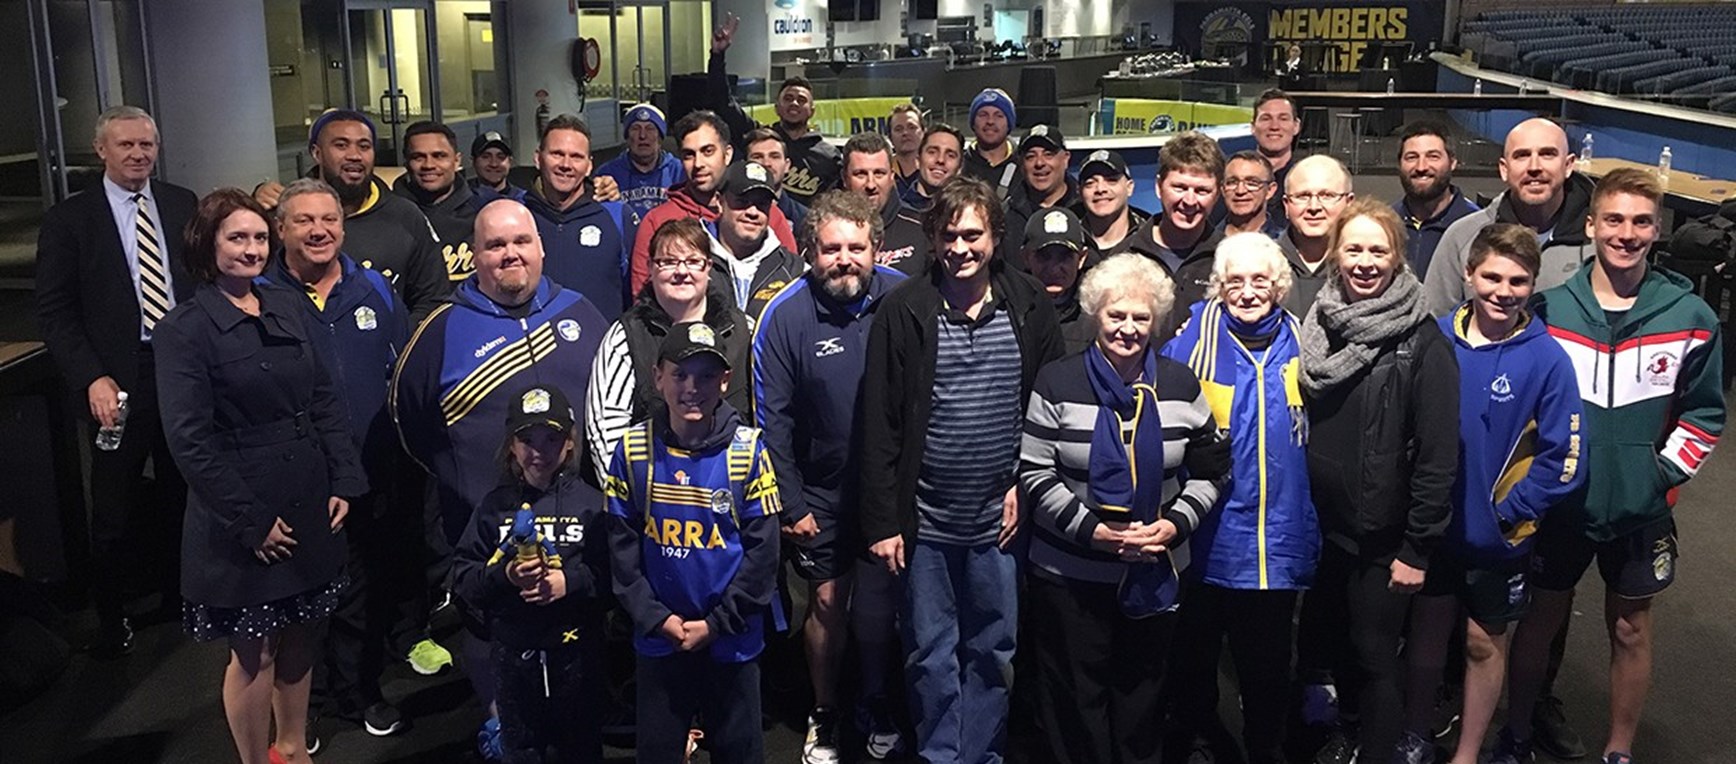 Eels hold Captain’s Club Coaches Briefing Function